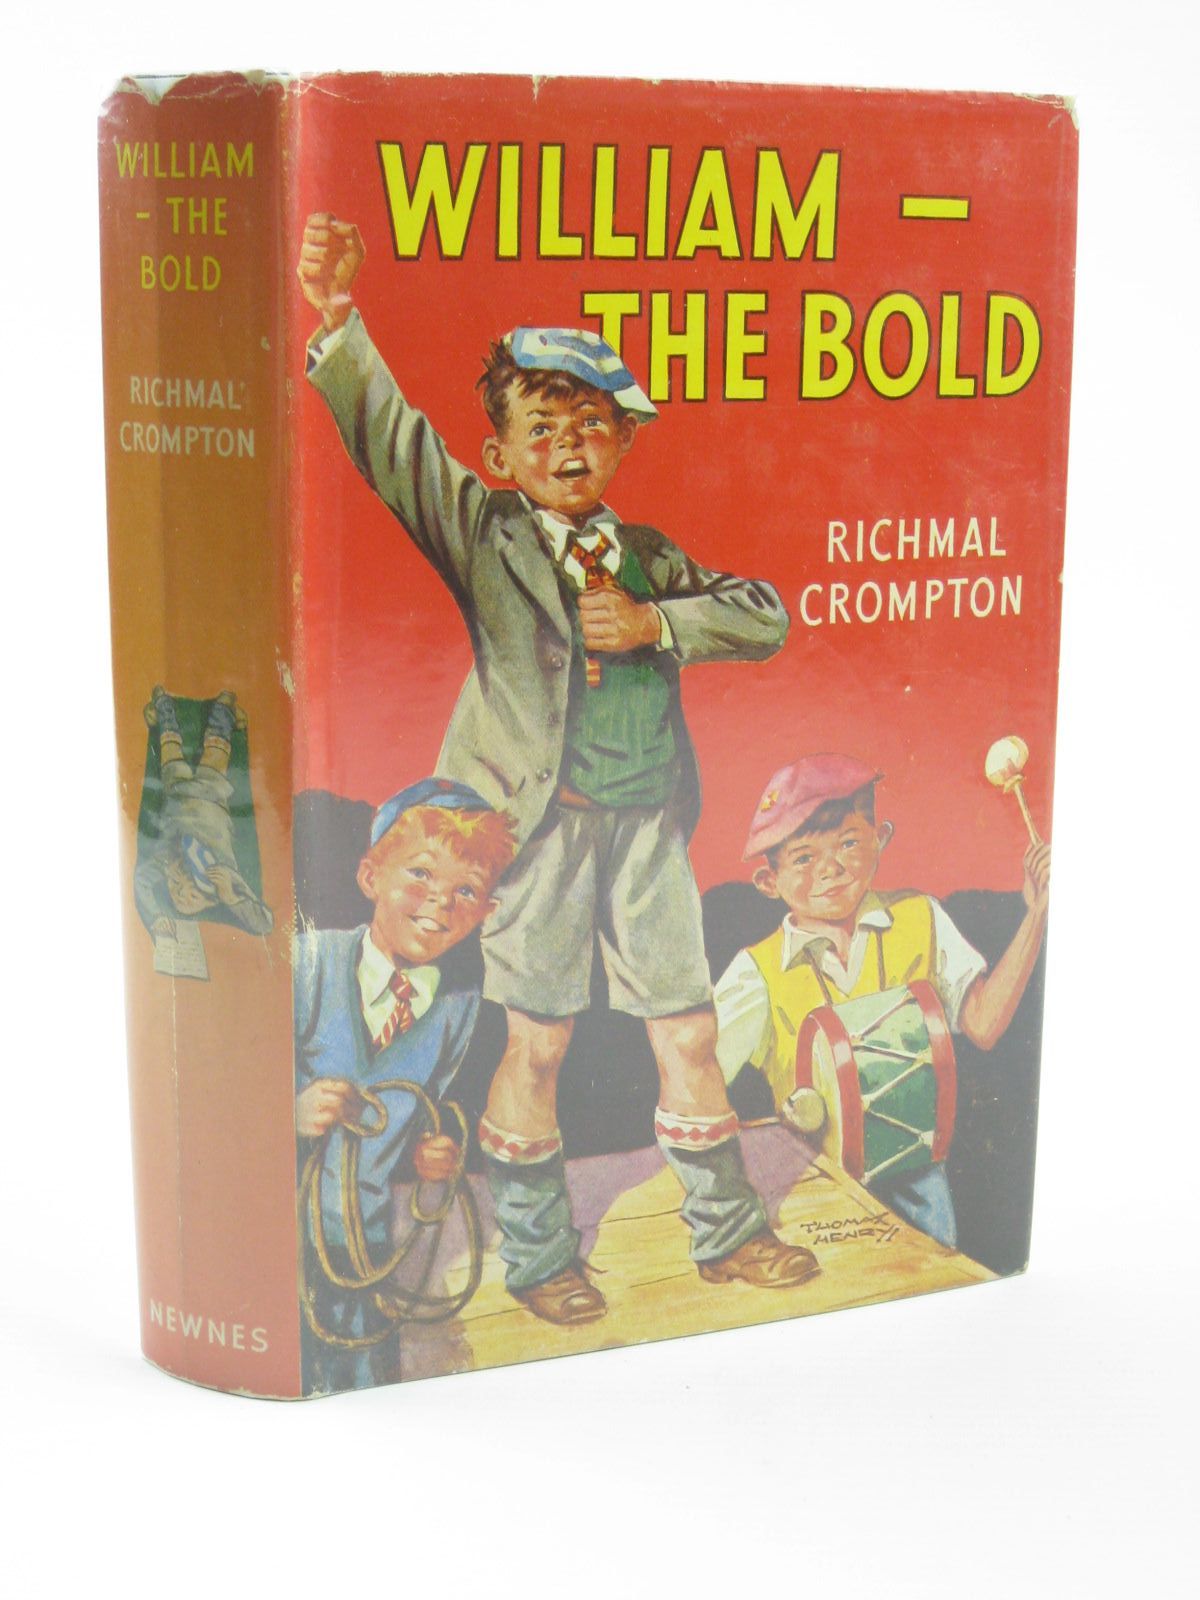 Cover of WILLIAM THE BOLD by Richmal Crompton